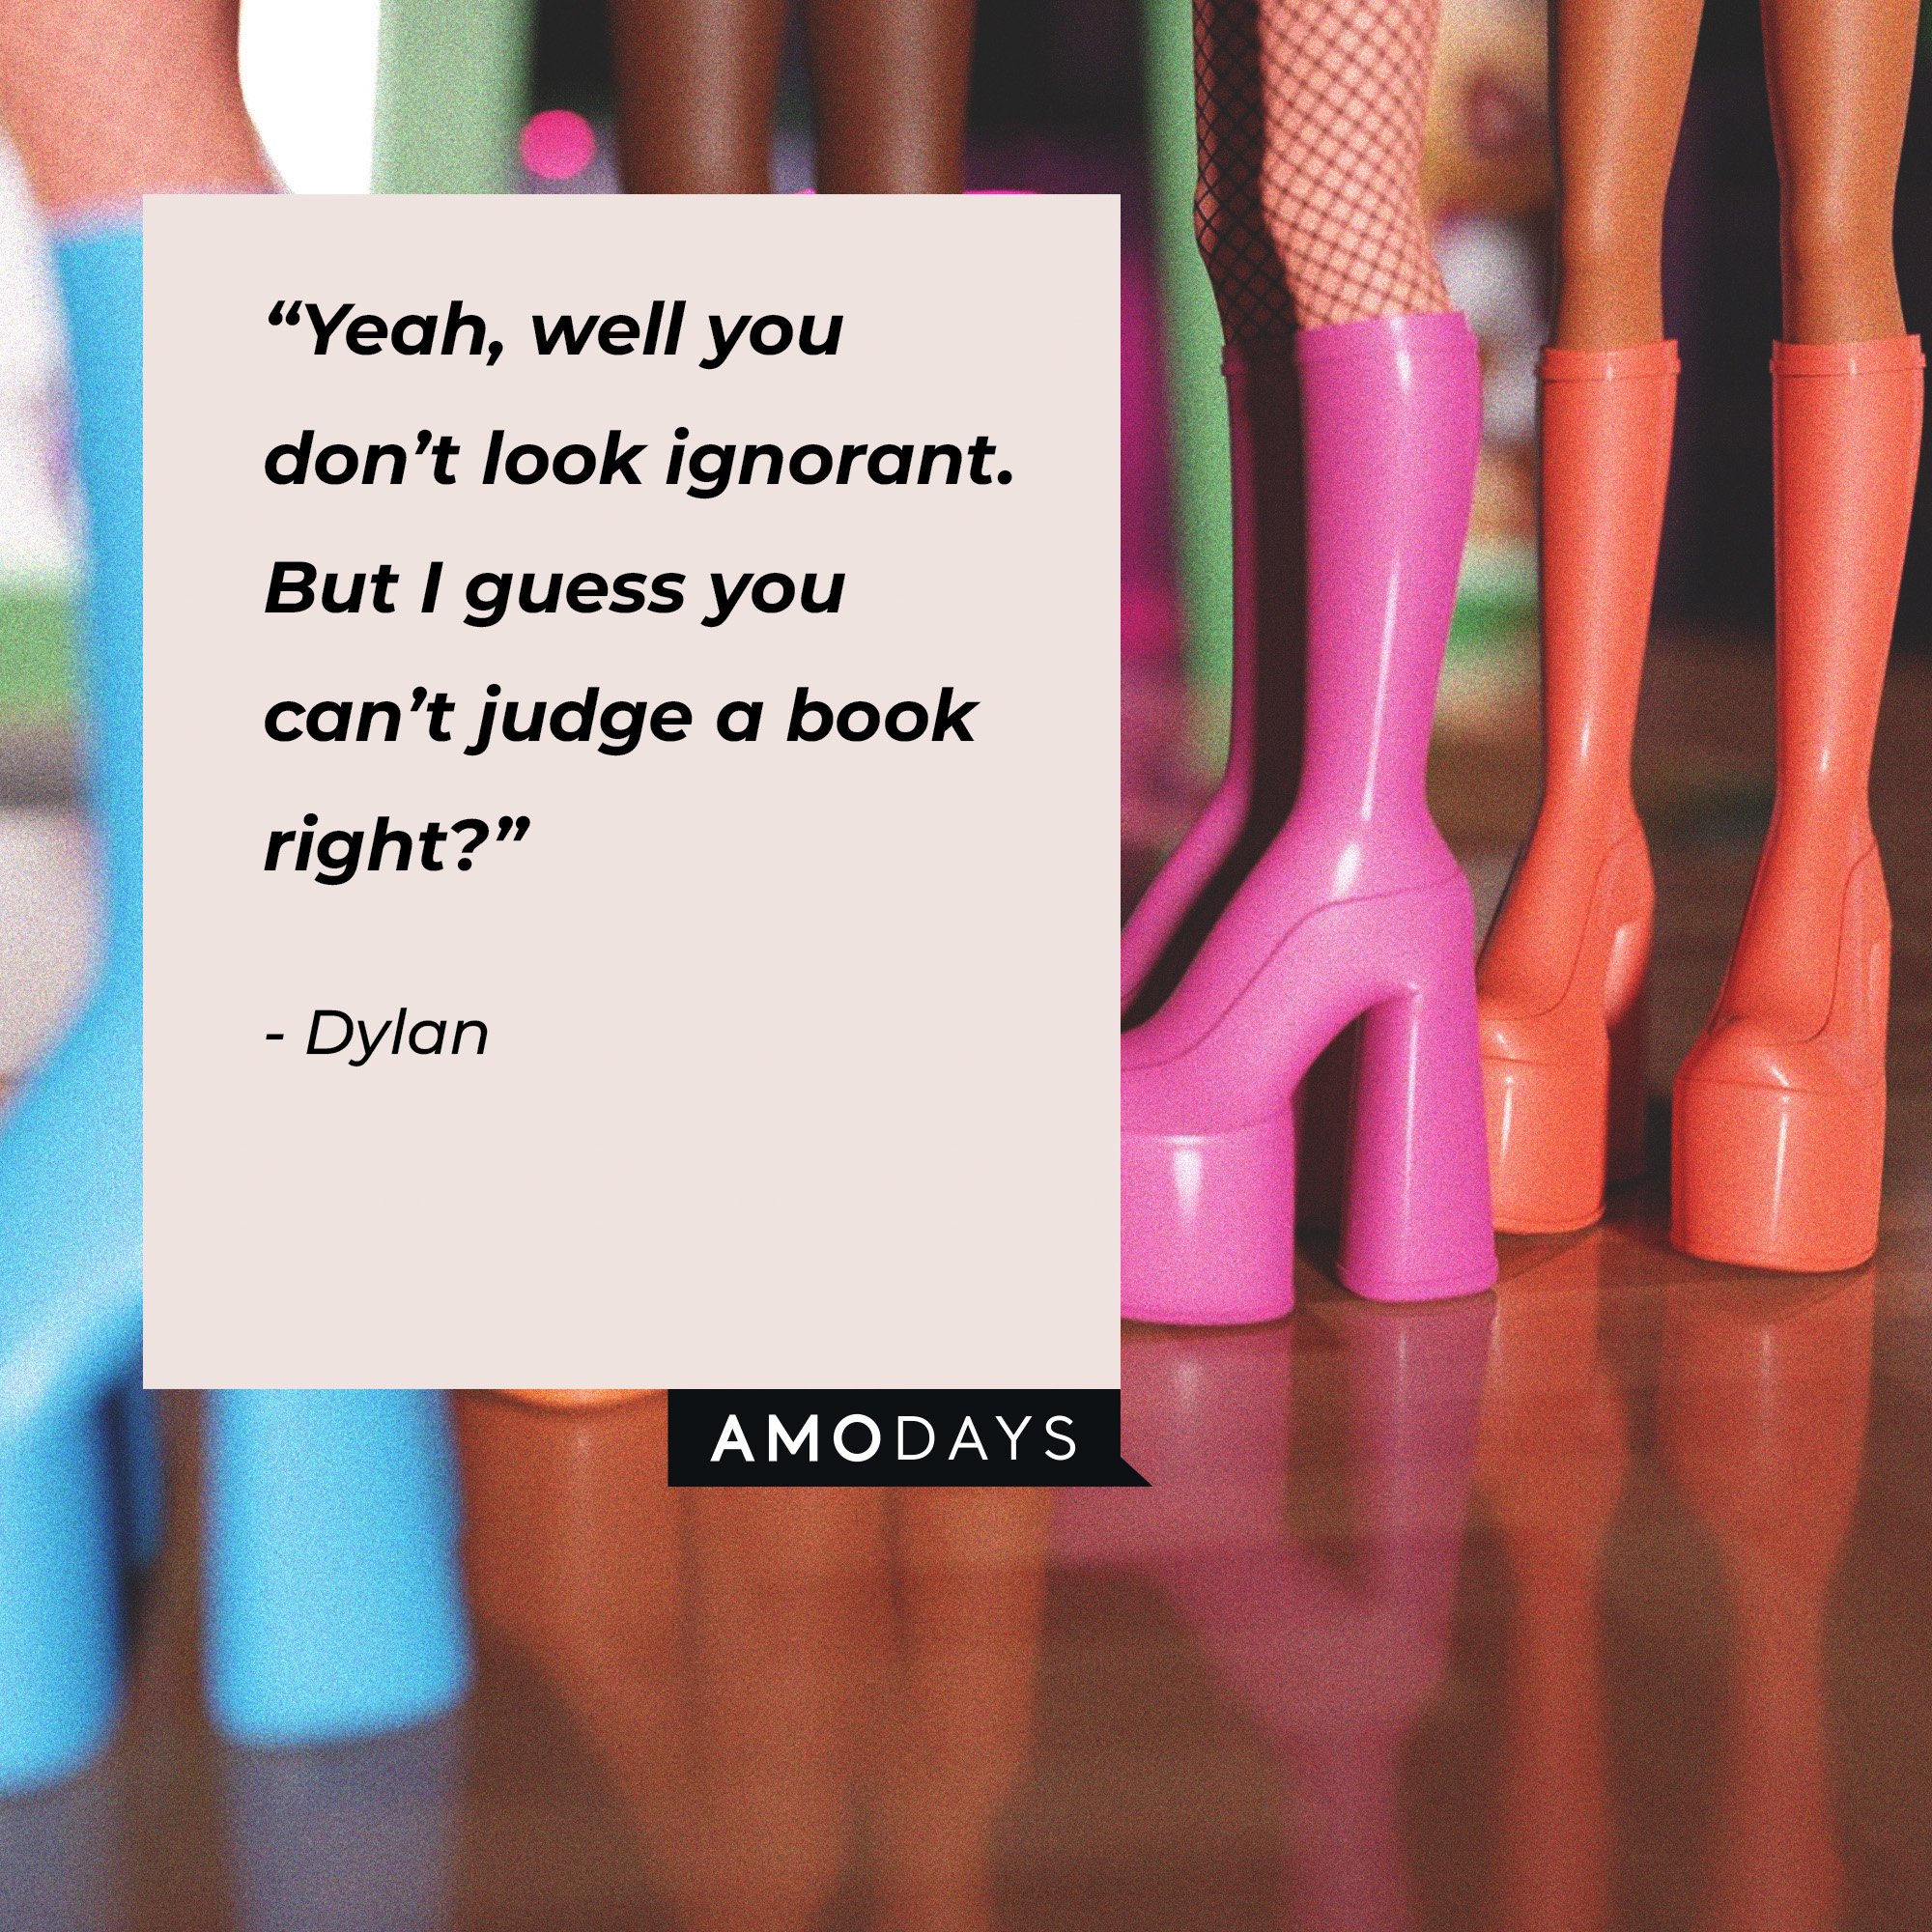 Dylan's quote: “Yeah, well you don’t look ignorant. But I guess you can’t judge a book right?” | Image: AmoDays